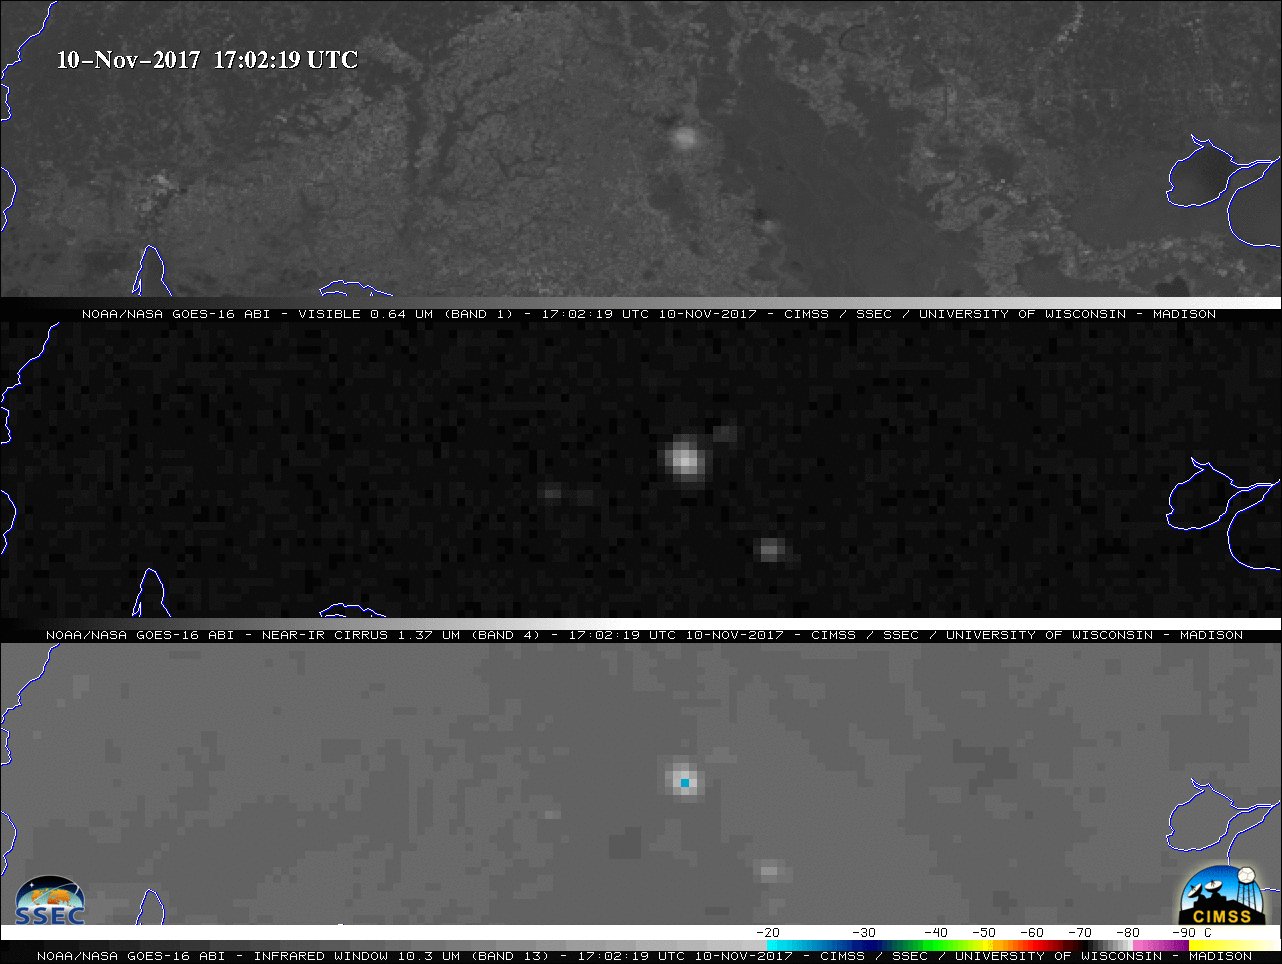 GOES-16 Visible (0.64 µm, top), Near-Infrared 